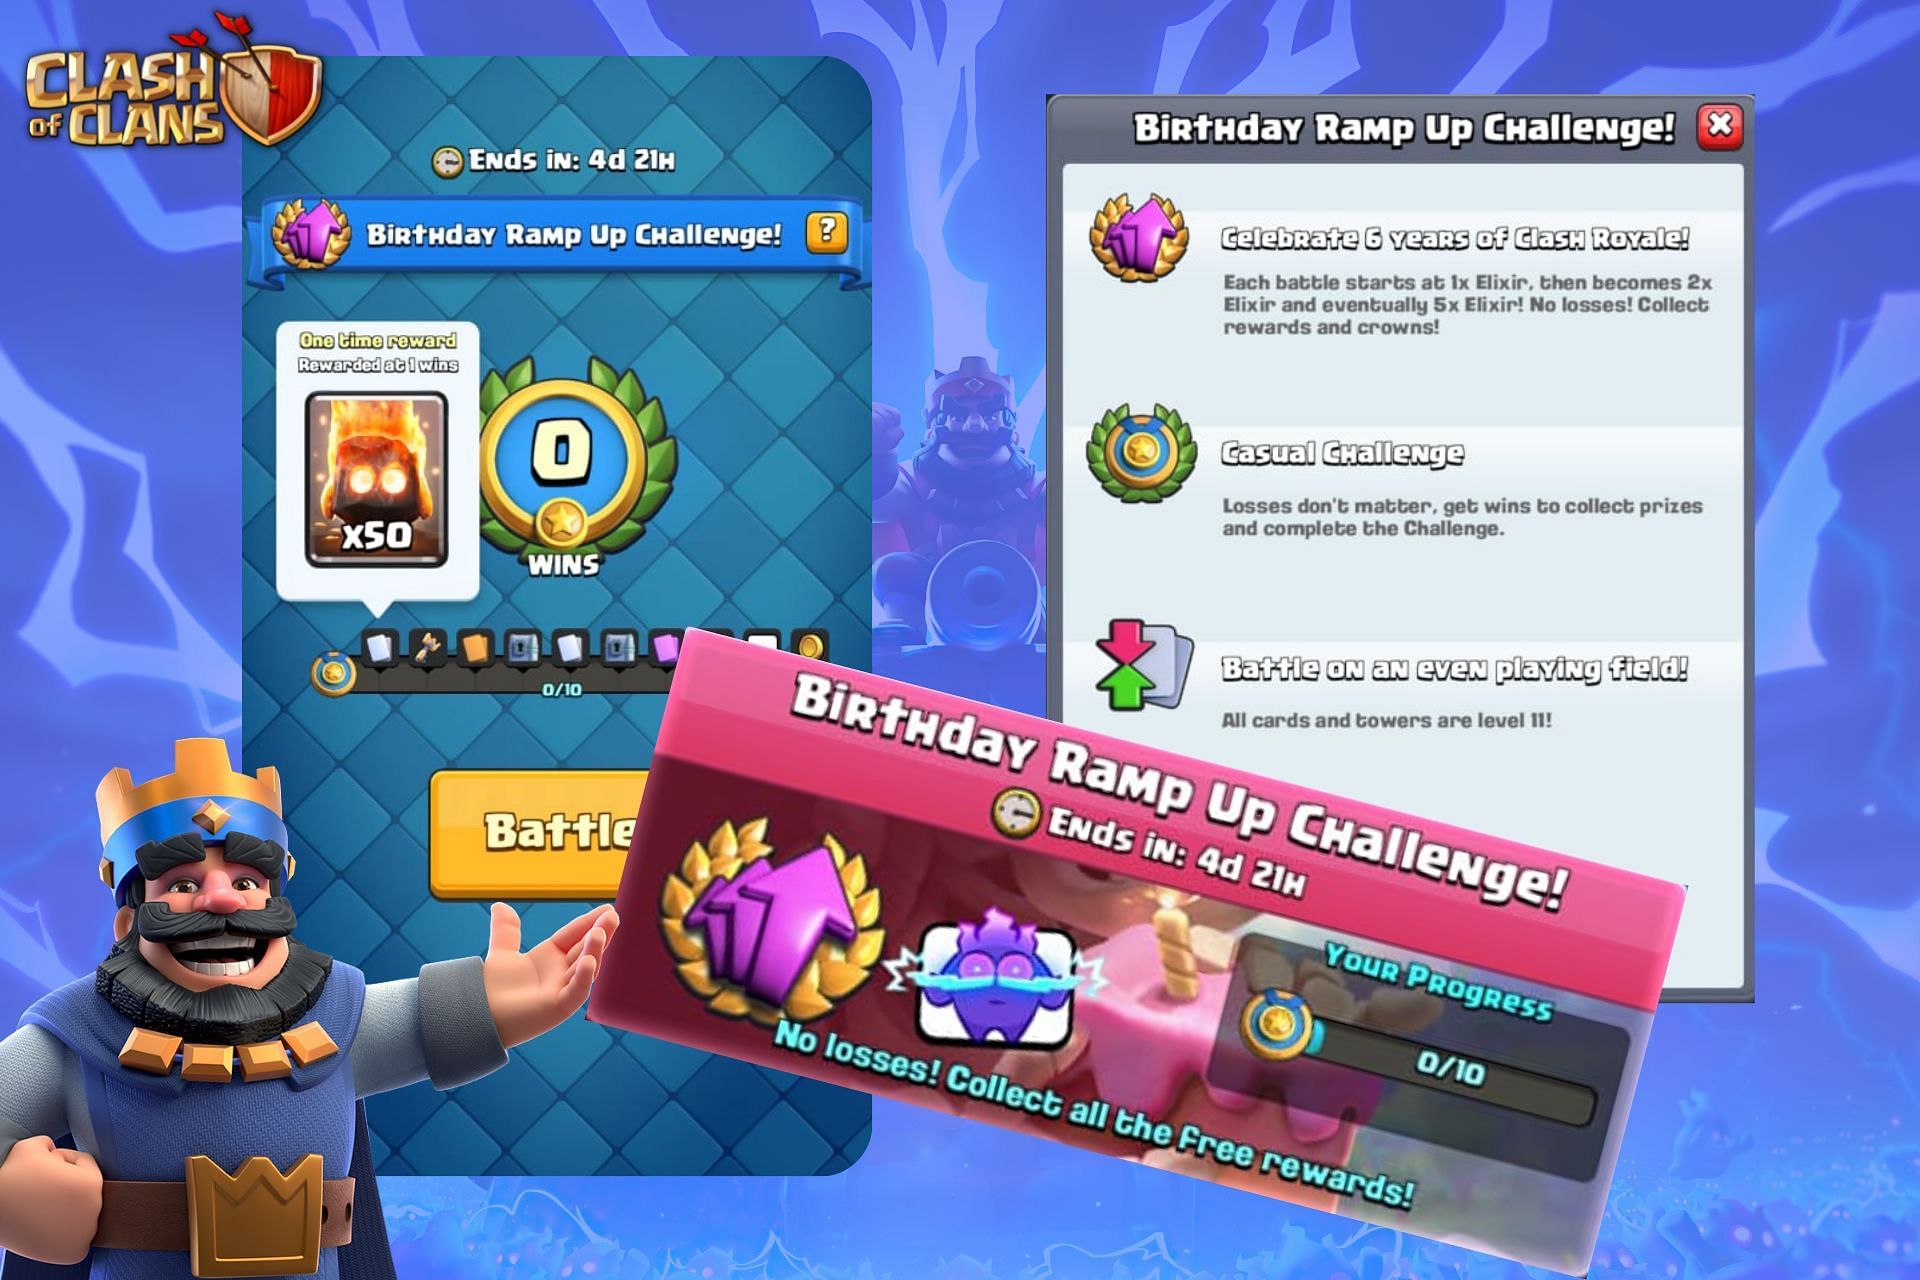 Champions Celebration Draft Challenge in Clash Royale: Information,  rewards, and more